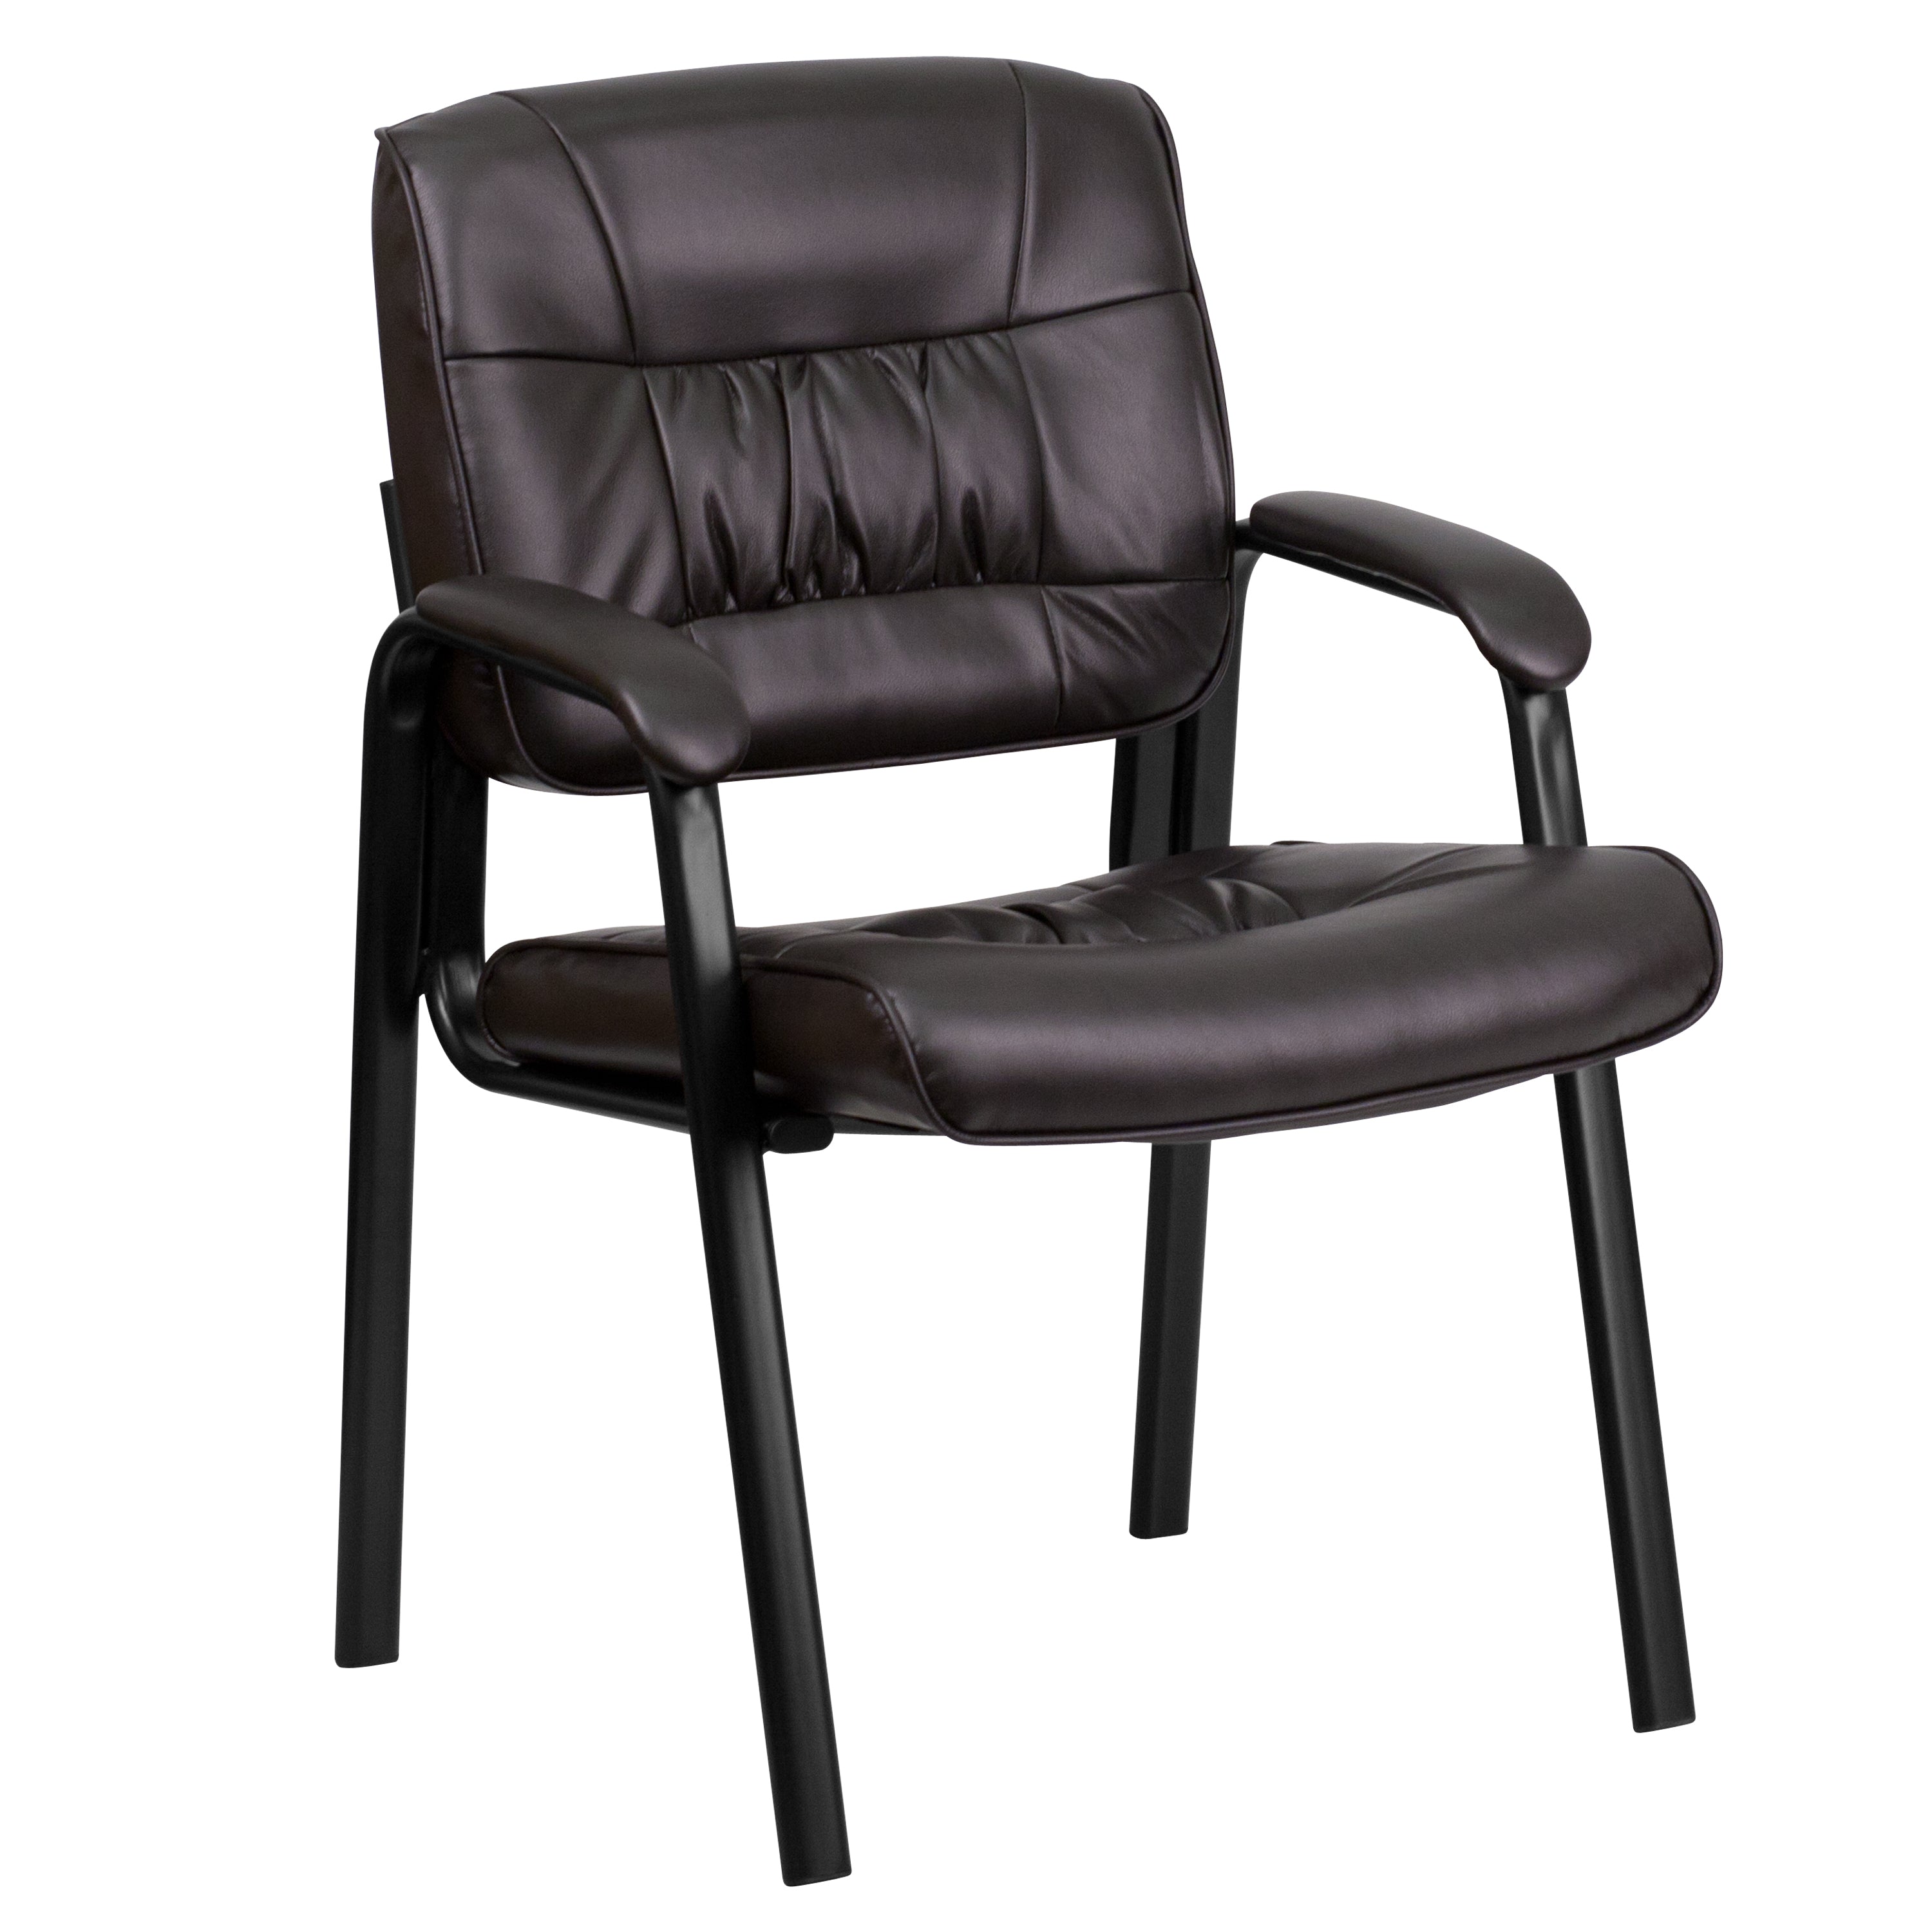 LeatherSoft Executive Side Reception Chair with Powder Coated Frame-Office Chair-Flash Furniture-Wall2Wall Furnishings